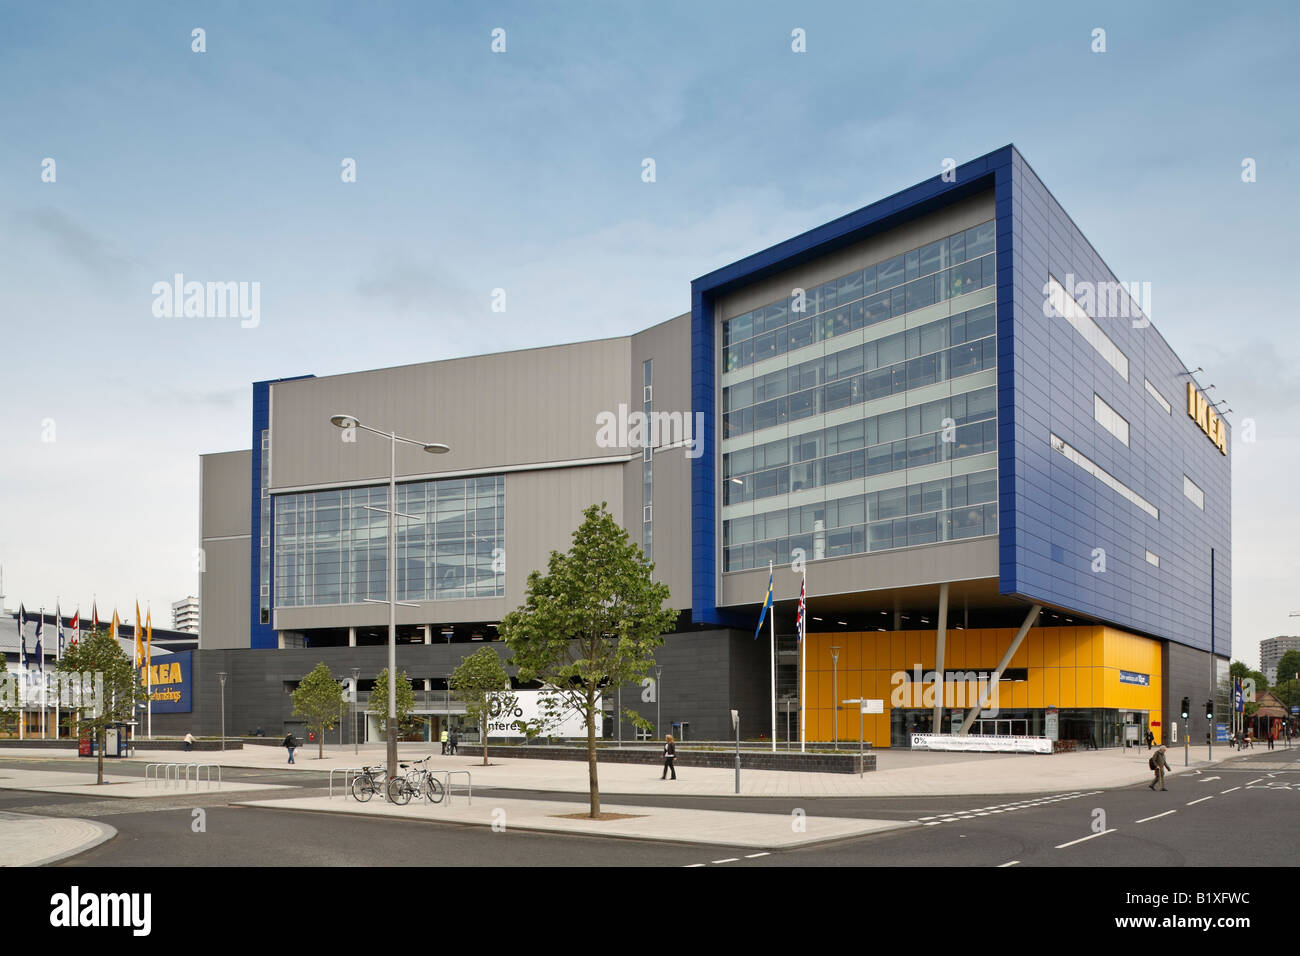 Ikea furniture store in Coventry Stock Photo